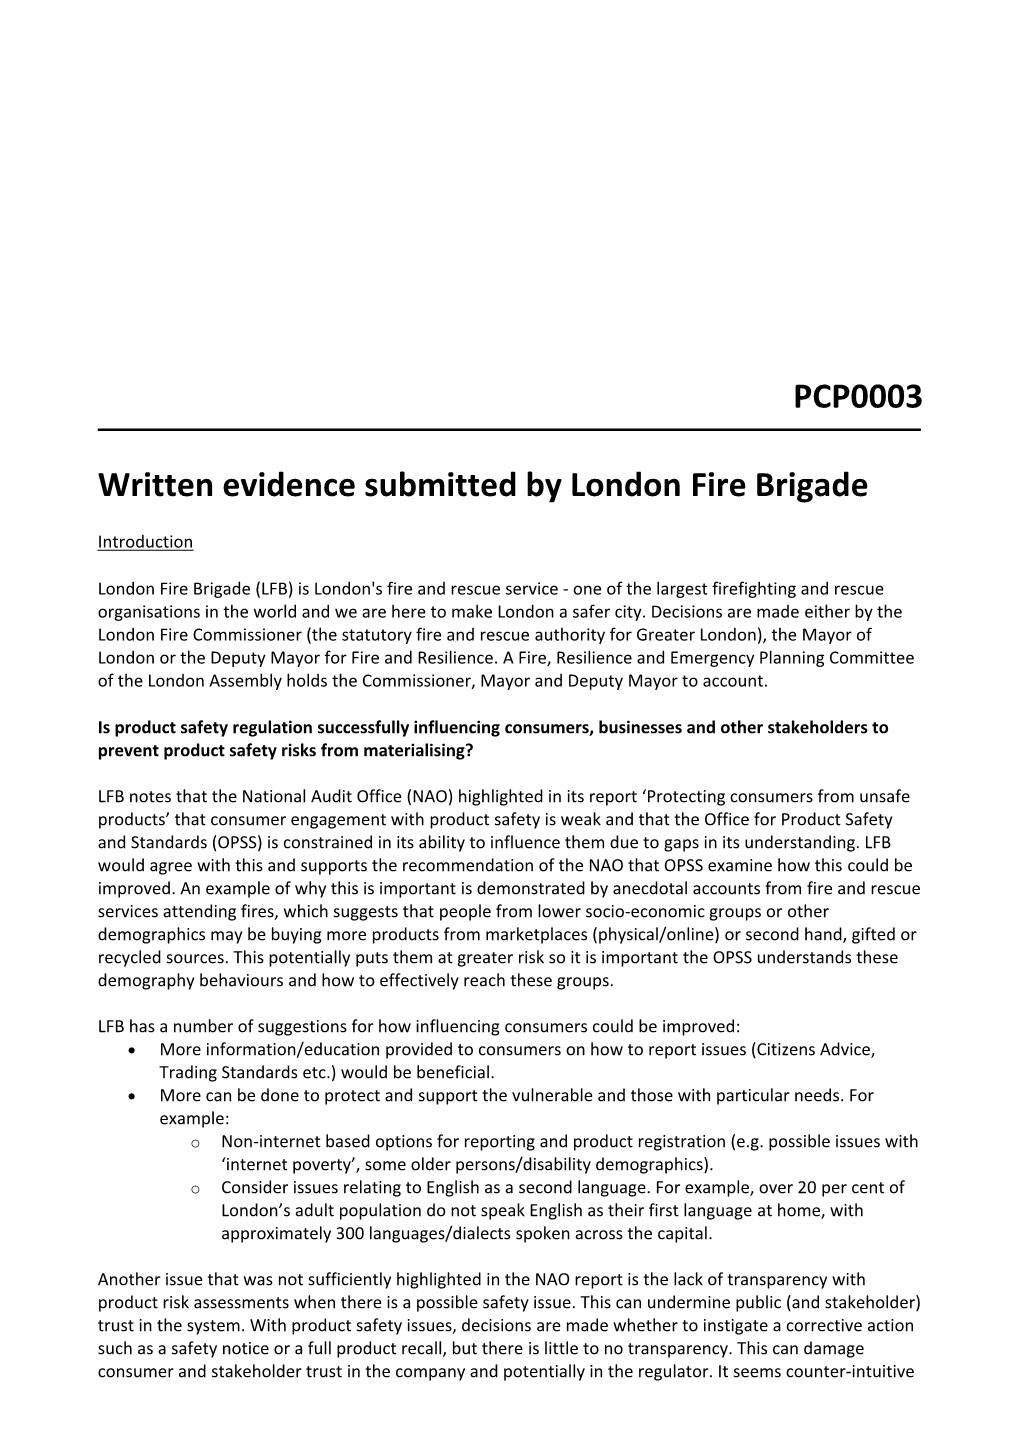 PCP0003 Written Evidence Submitted by London Fire Brigade